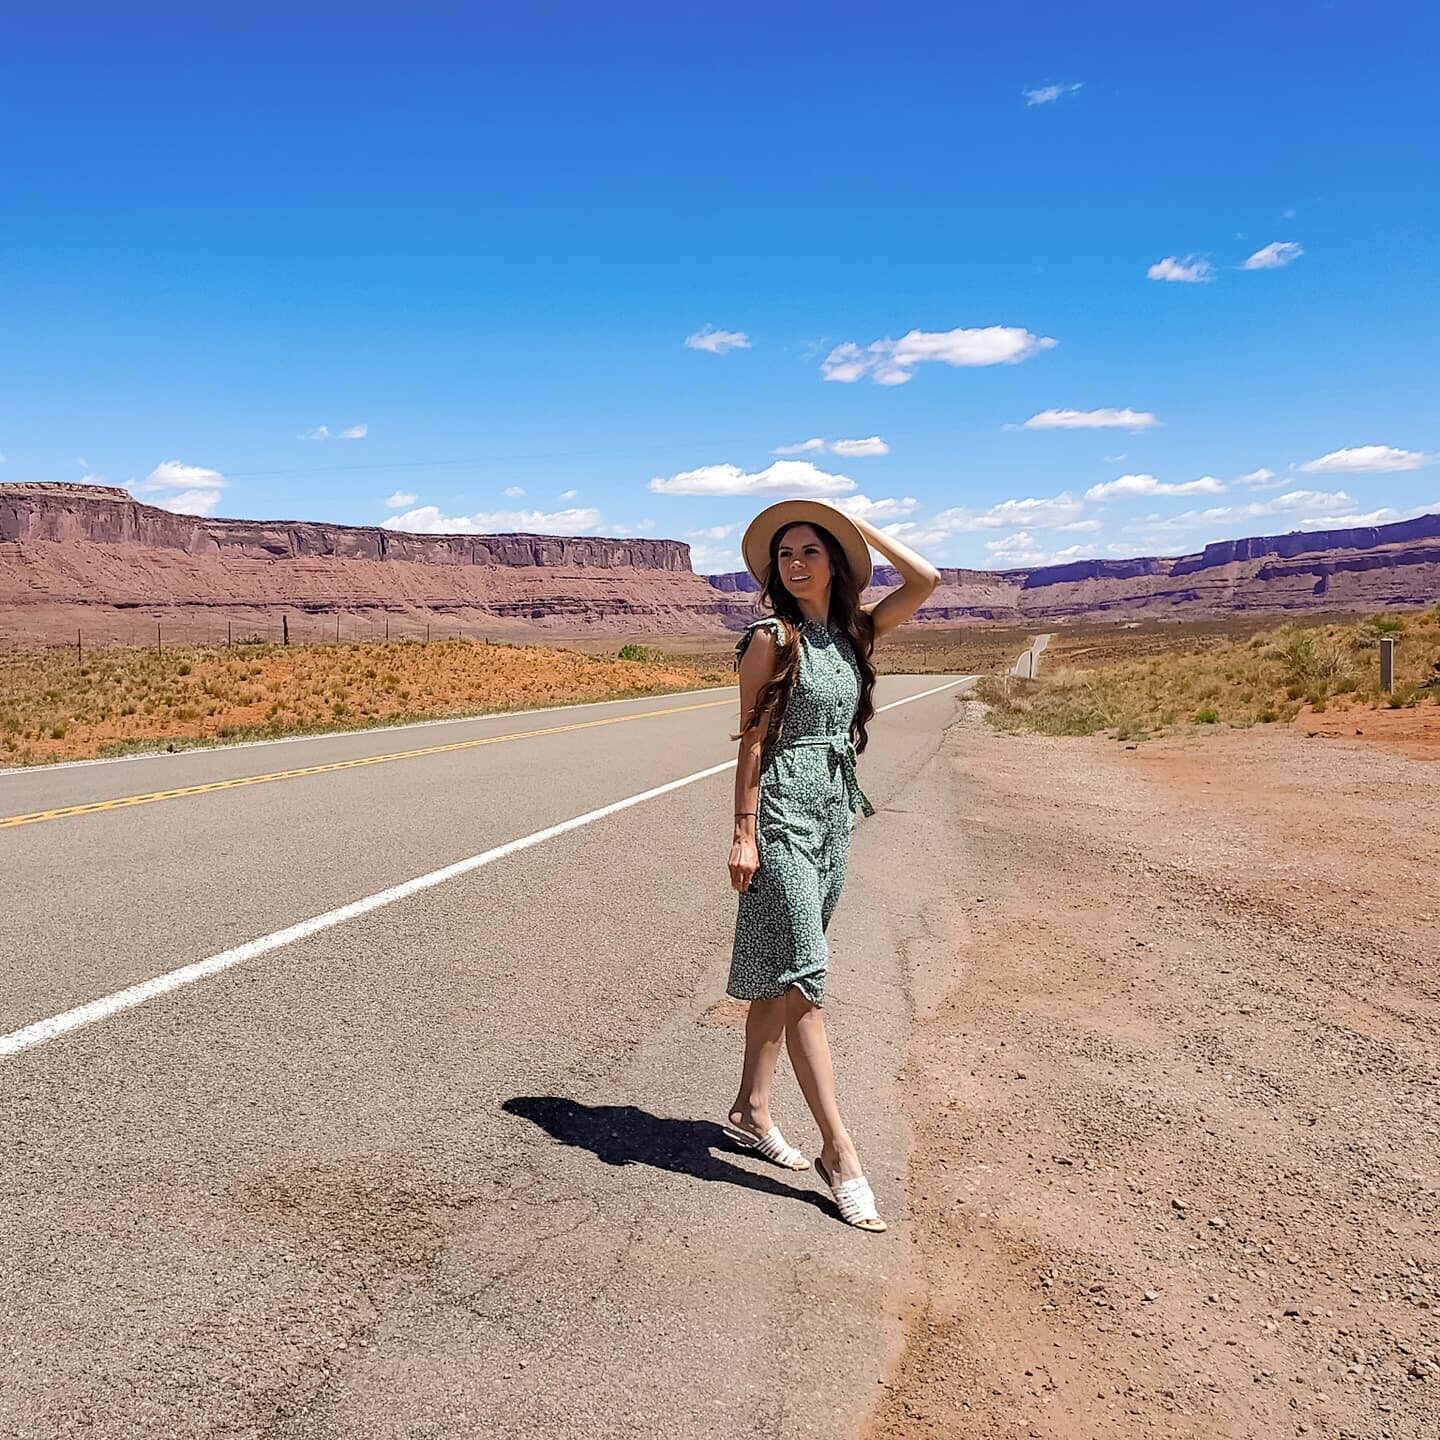 **Hidden gem alert!**

I snapped these shots on the Upper Colorado River Scenic Byway, a 44-mile road near Moab where I only saw about 5 other cars.

This is not the main highway into Moab, so if you don't know about it, you might miss it. And that w